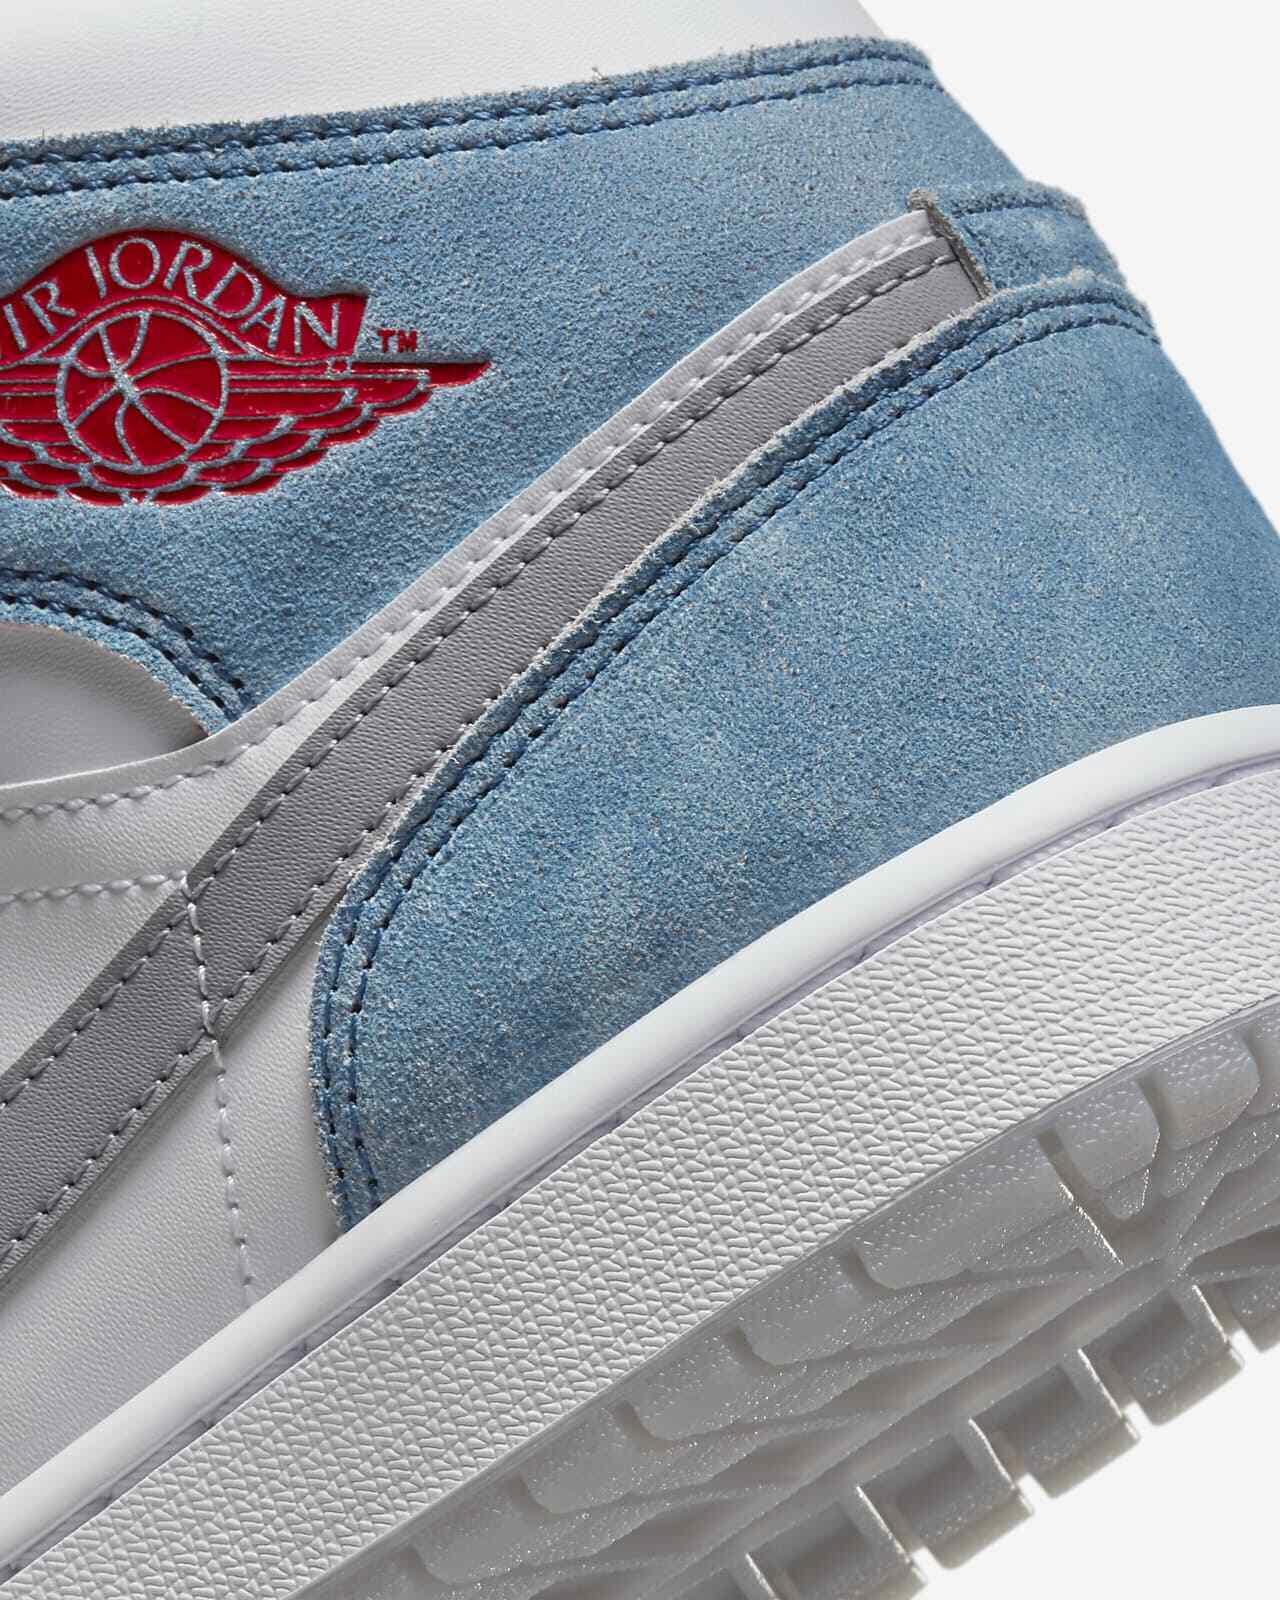 Nike Air Jordan 1 Mid SE French Blue Fire Red [US 7-12] DN3706-401 